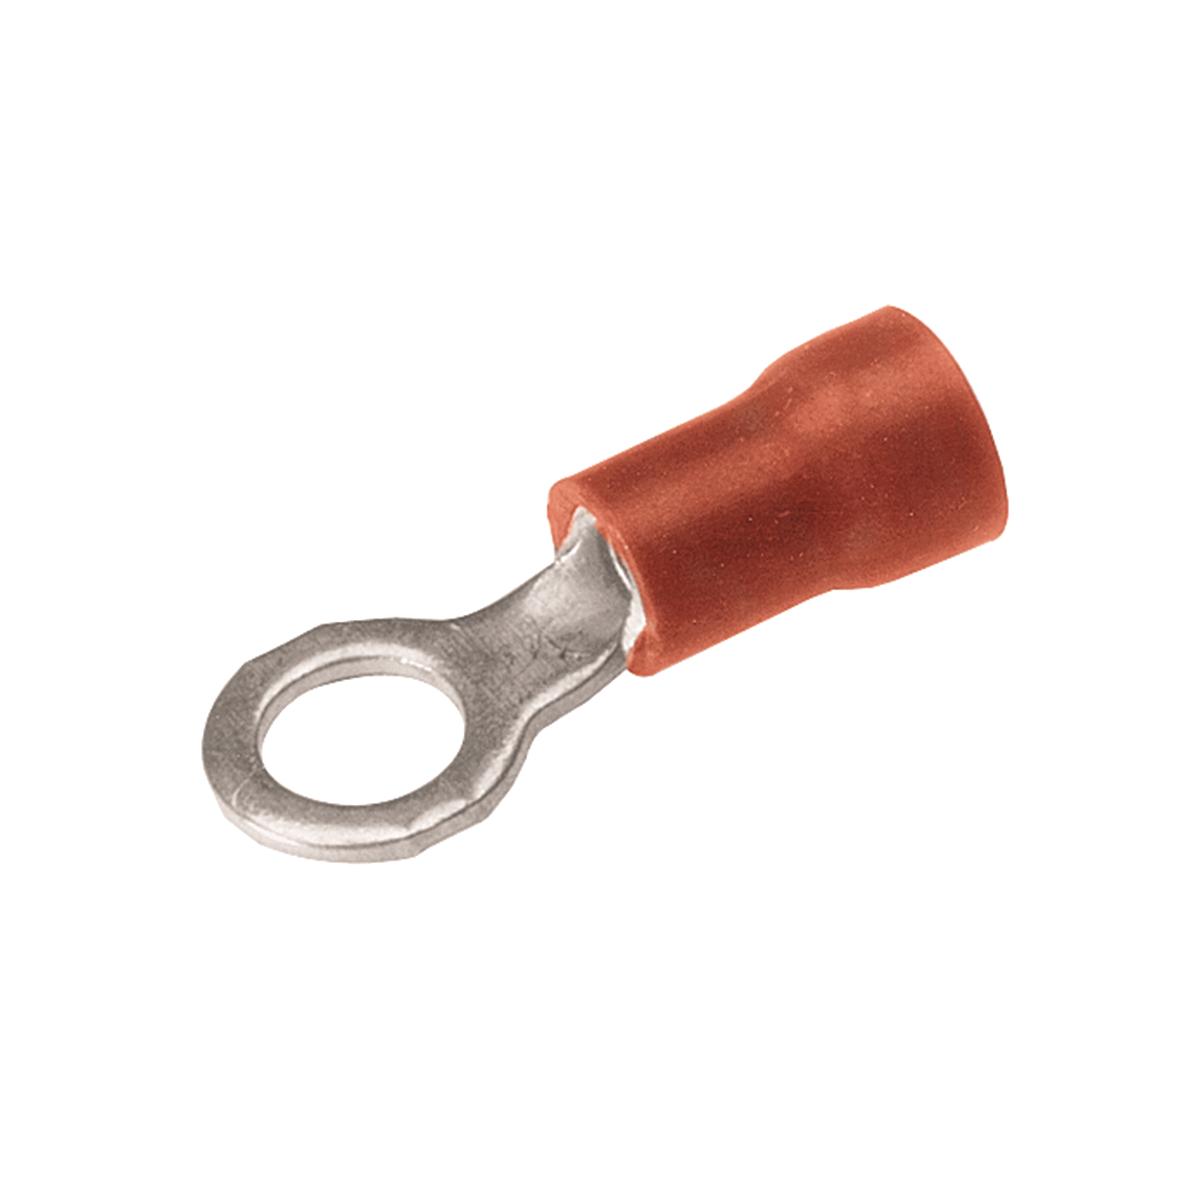 Hubbell BA16E6 Vinyl Ring Terminal For 22 - 16 AWG.  ; Expanded insulation support accepts standard and large wire diameters providing lower inventory requirements and greater flexibility ; Funnel entry for easy wire insertion ; Manufactured of pure electrolytic copper 